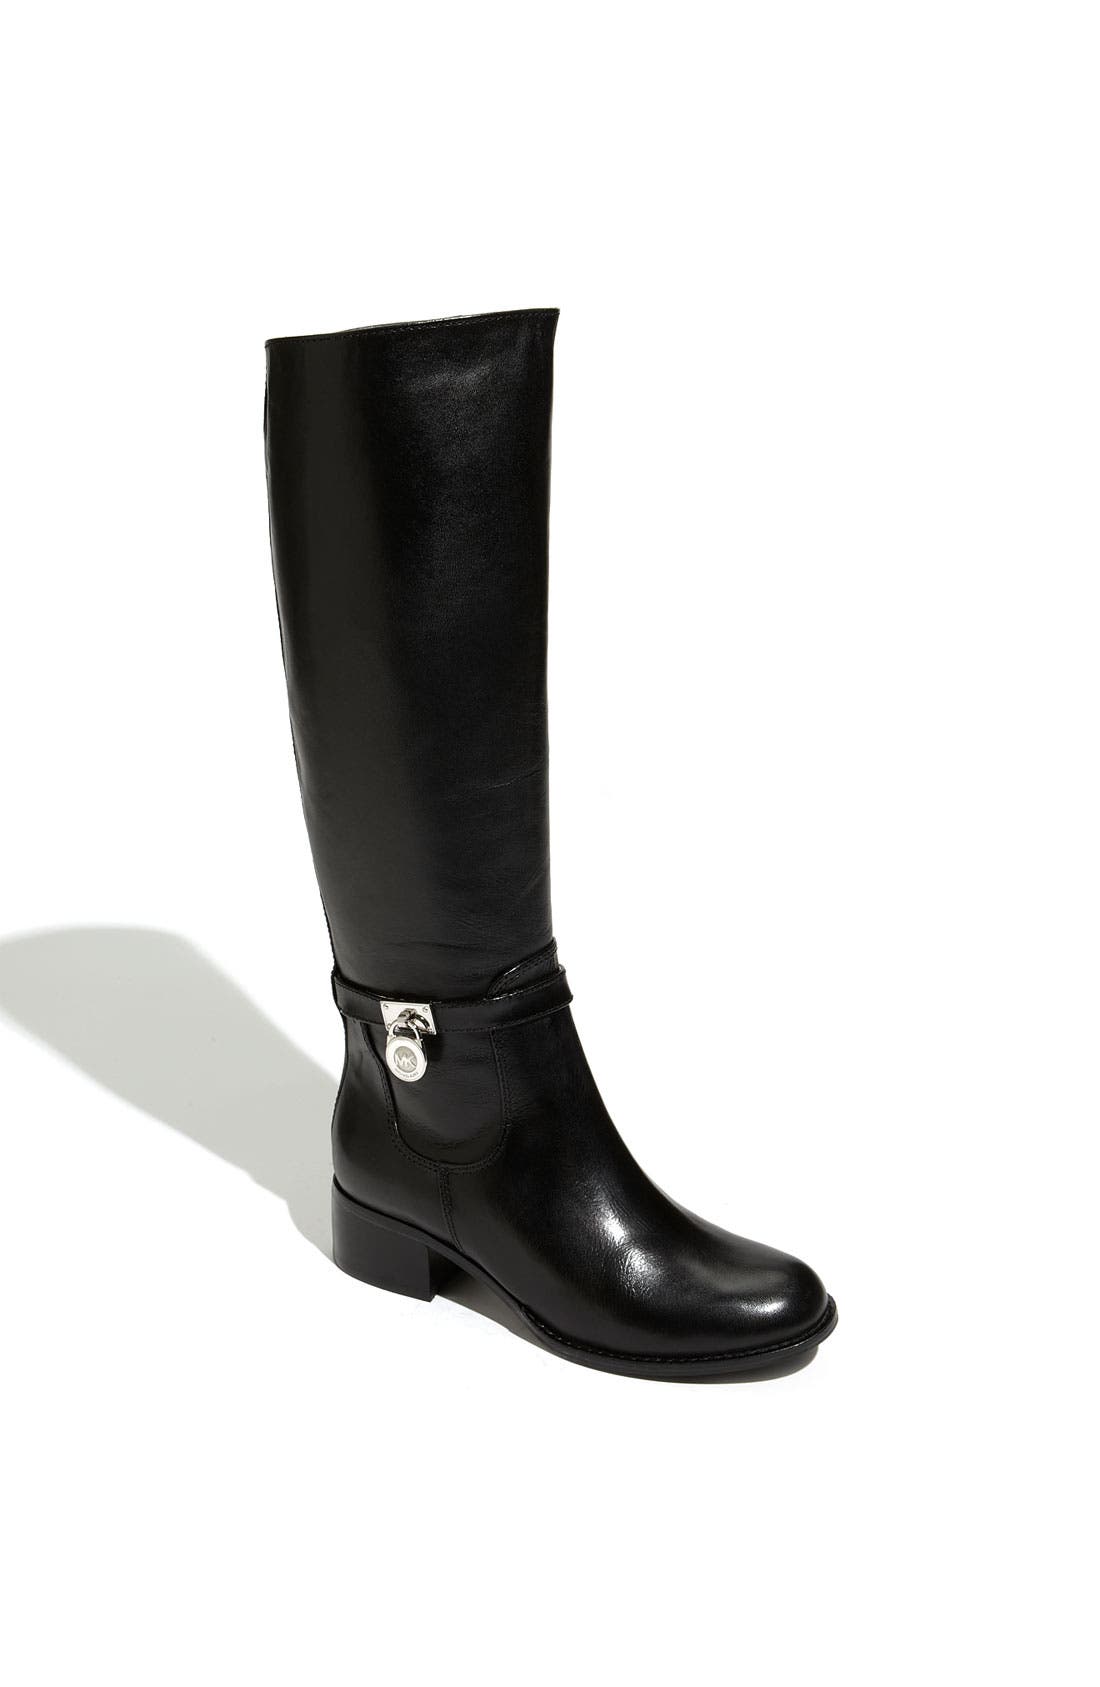 michael kors riding boots black and brown